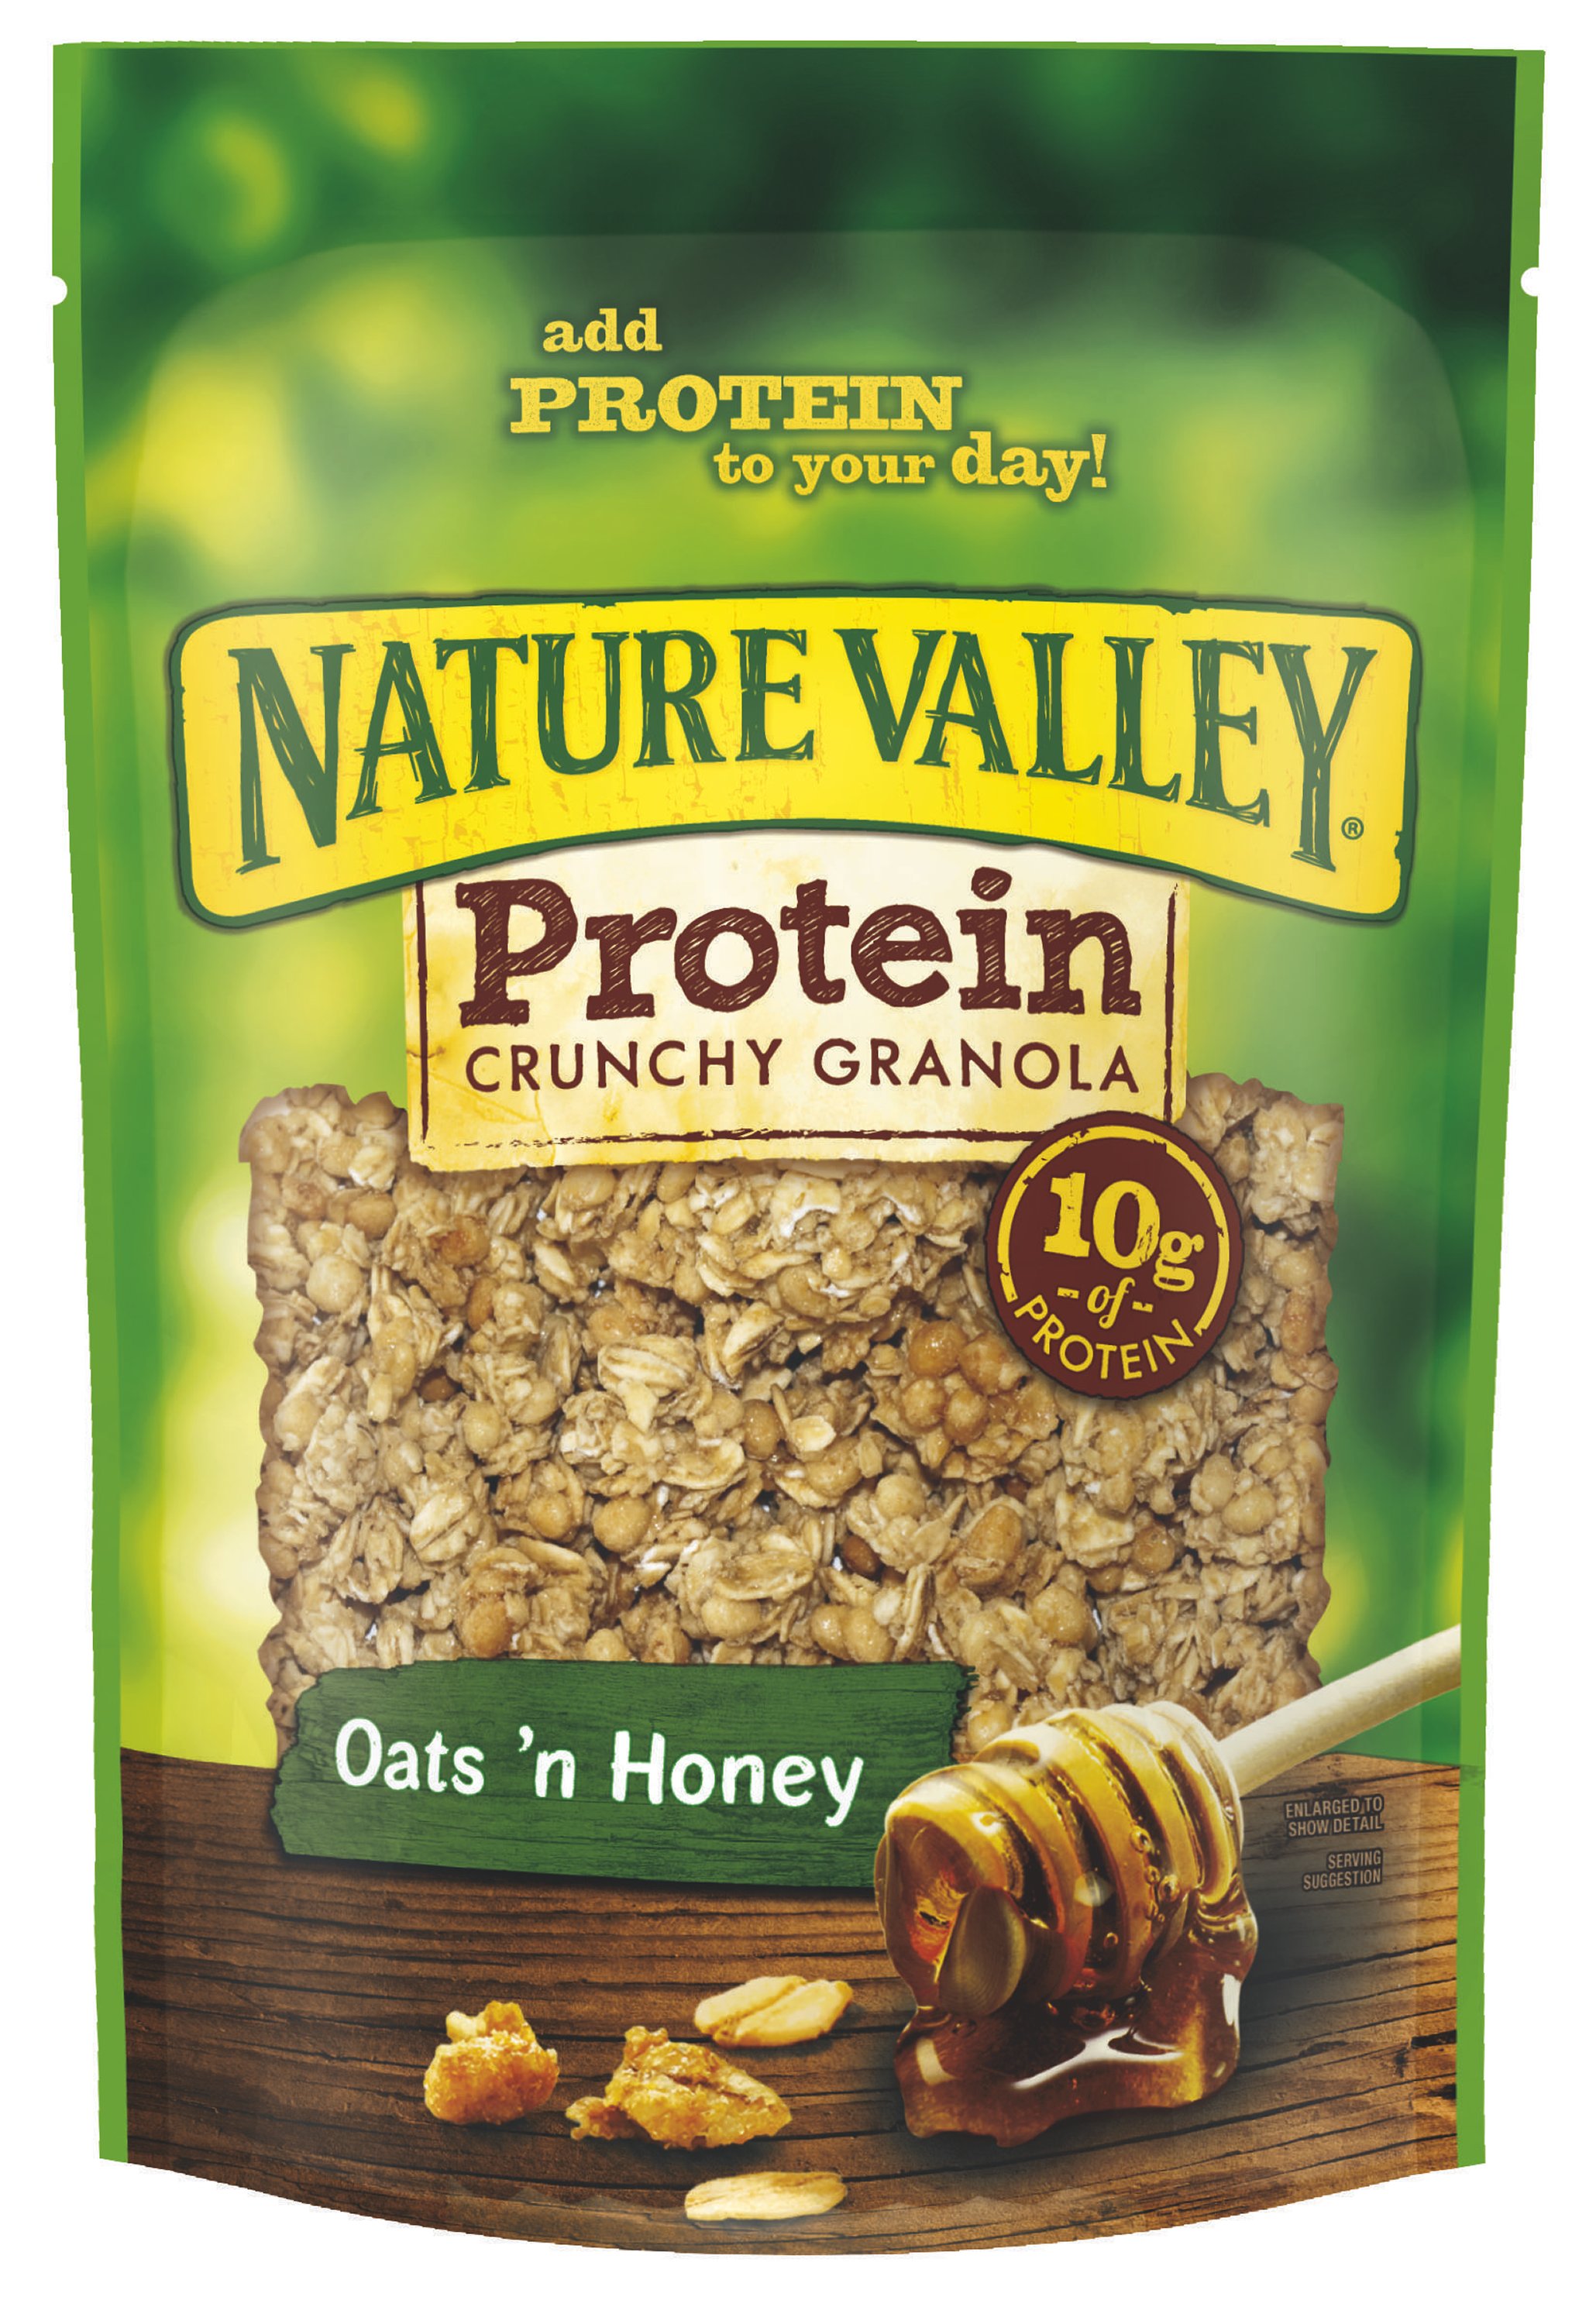 FREE Nature Valley Protein Crunchy Granola at Target